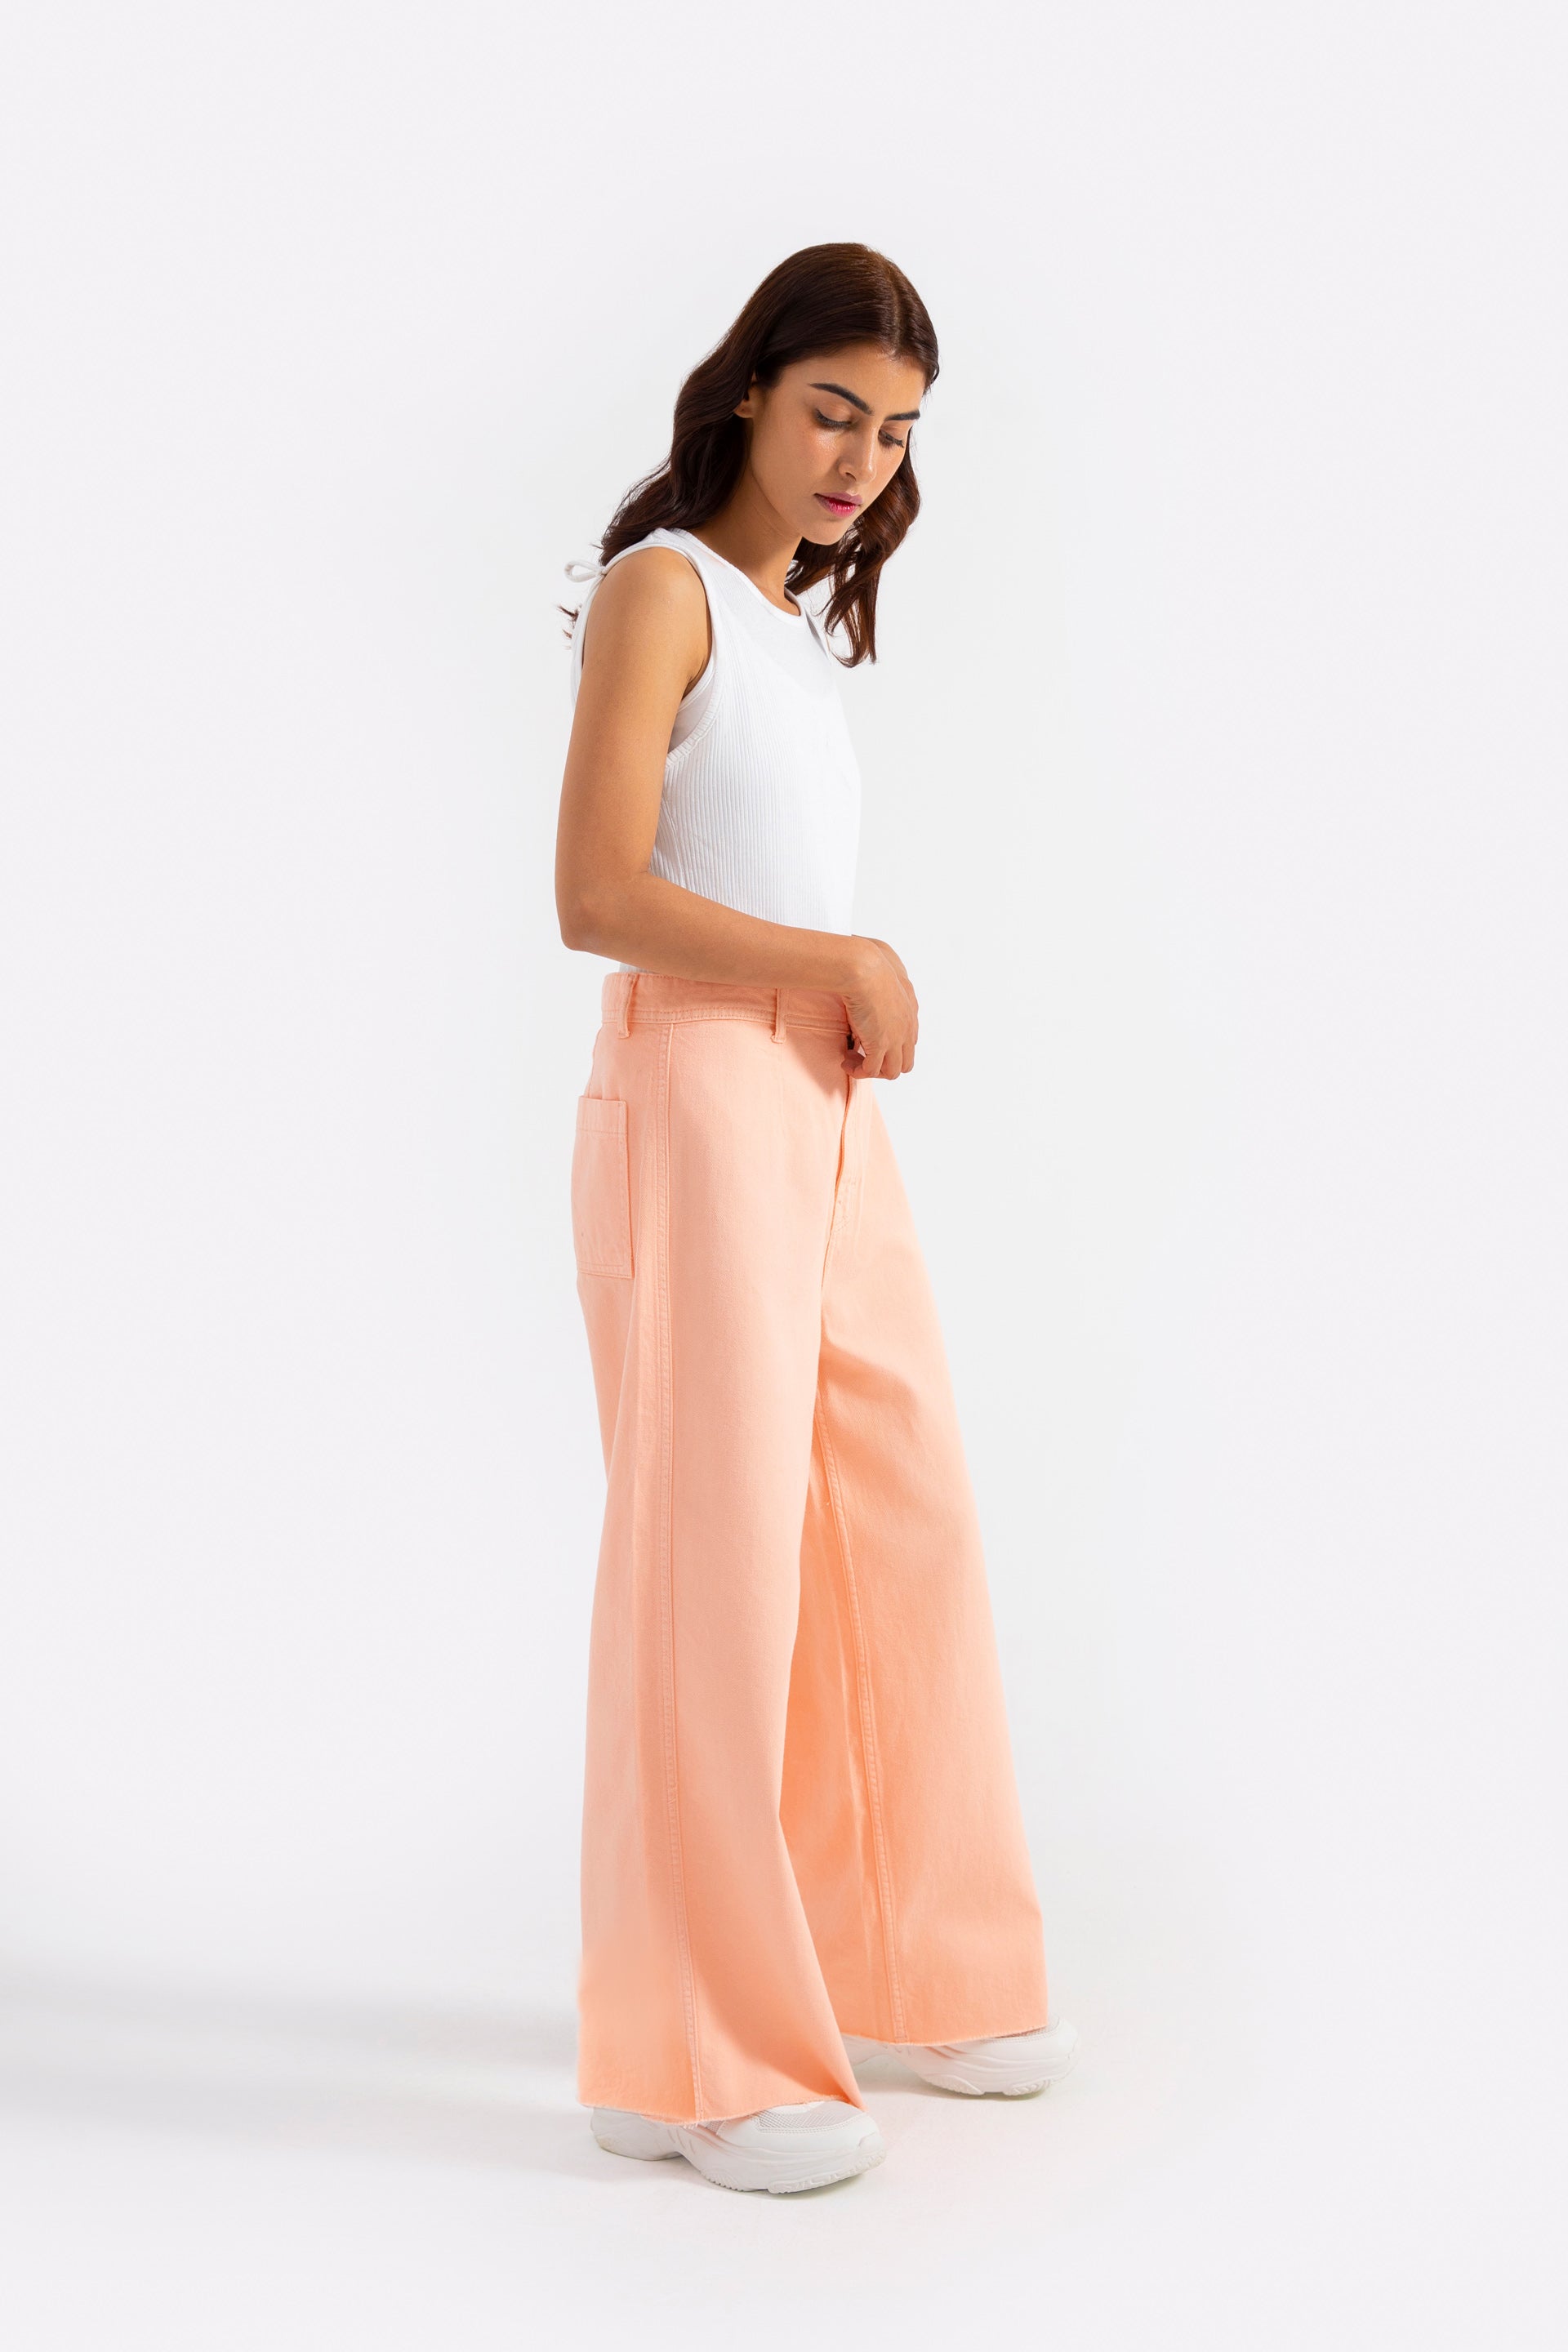 Solada Women's wide leg trousers: for sale at 19.99€ on Mecshopping.it